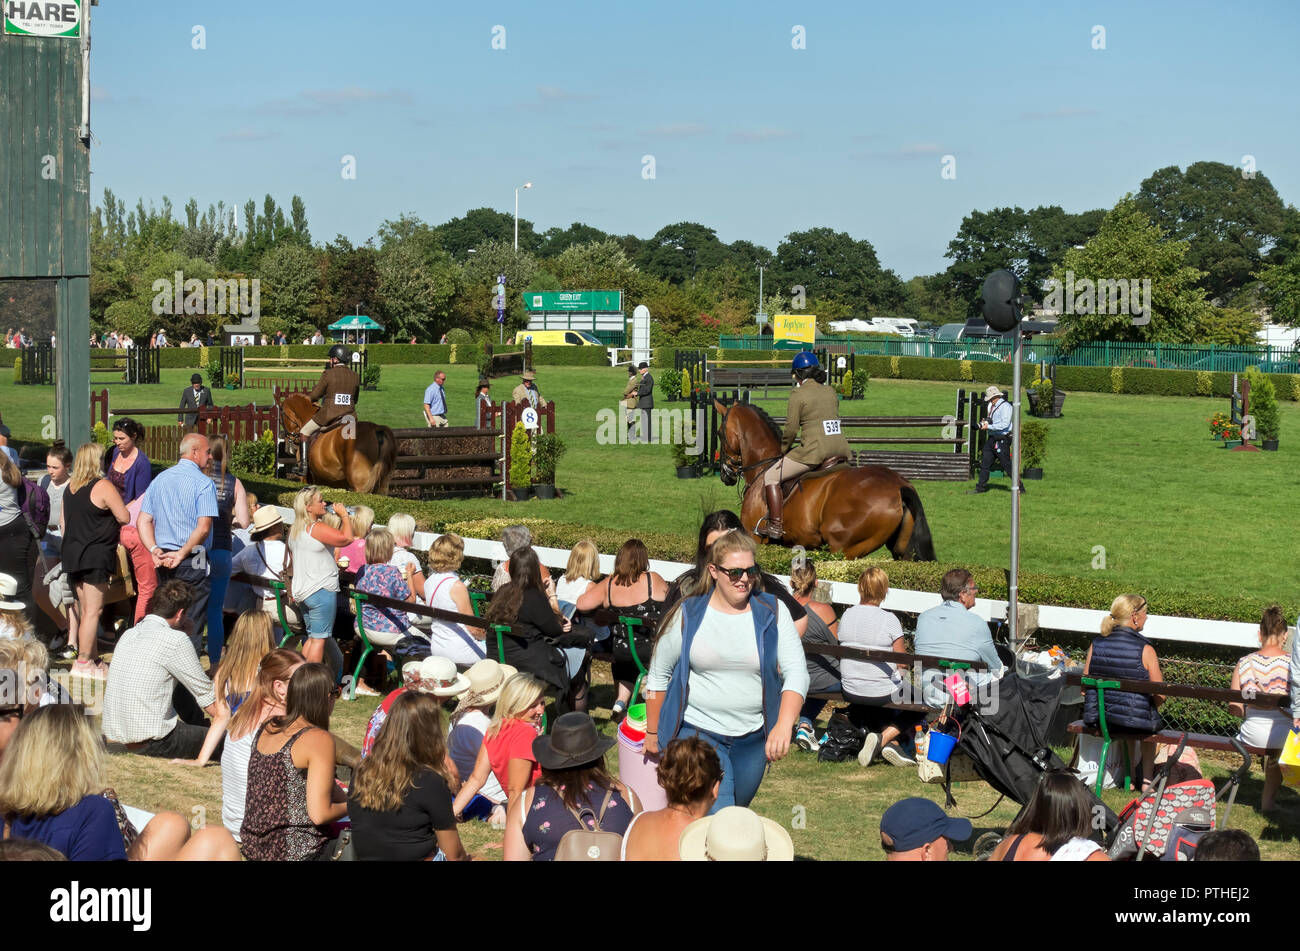 People watching show jumping at the Great Yorkshire Show in summer Harrogate North Yorkshire England UK United Kingdom GB Great Britain Stock Photo